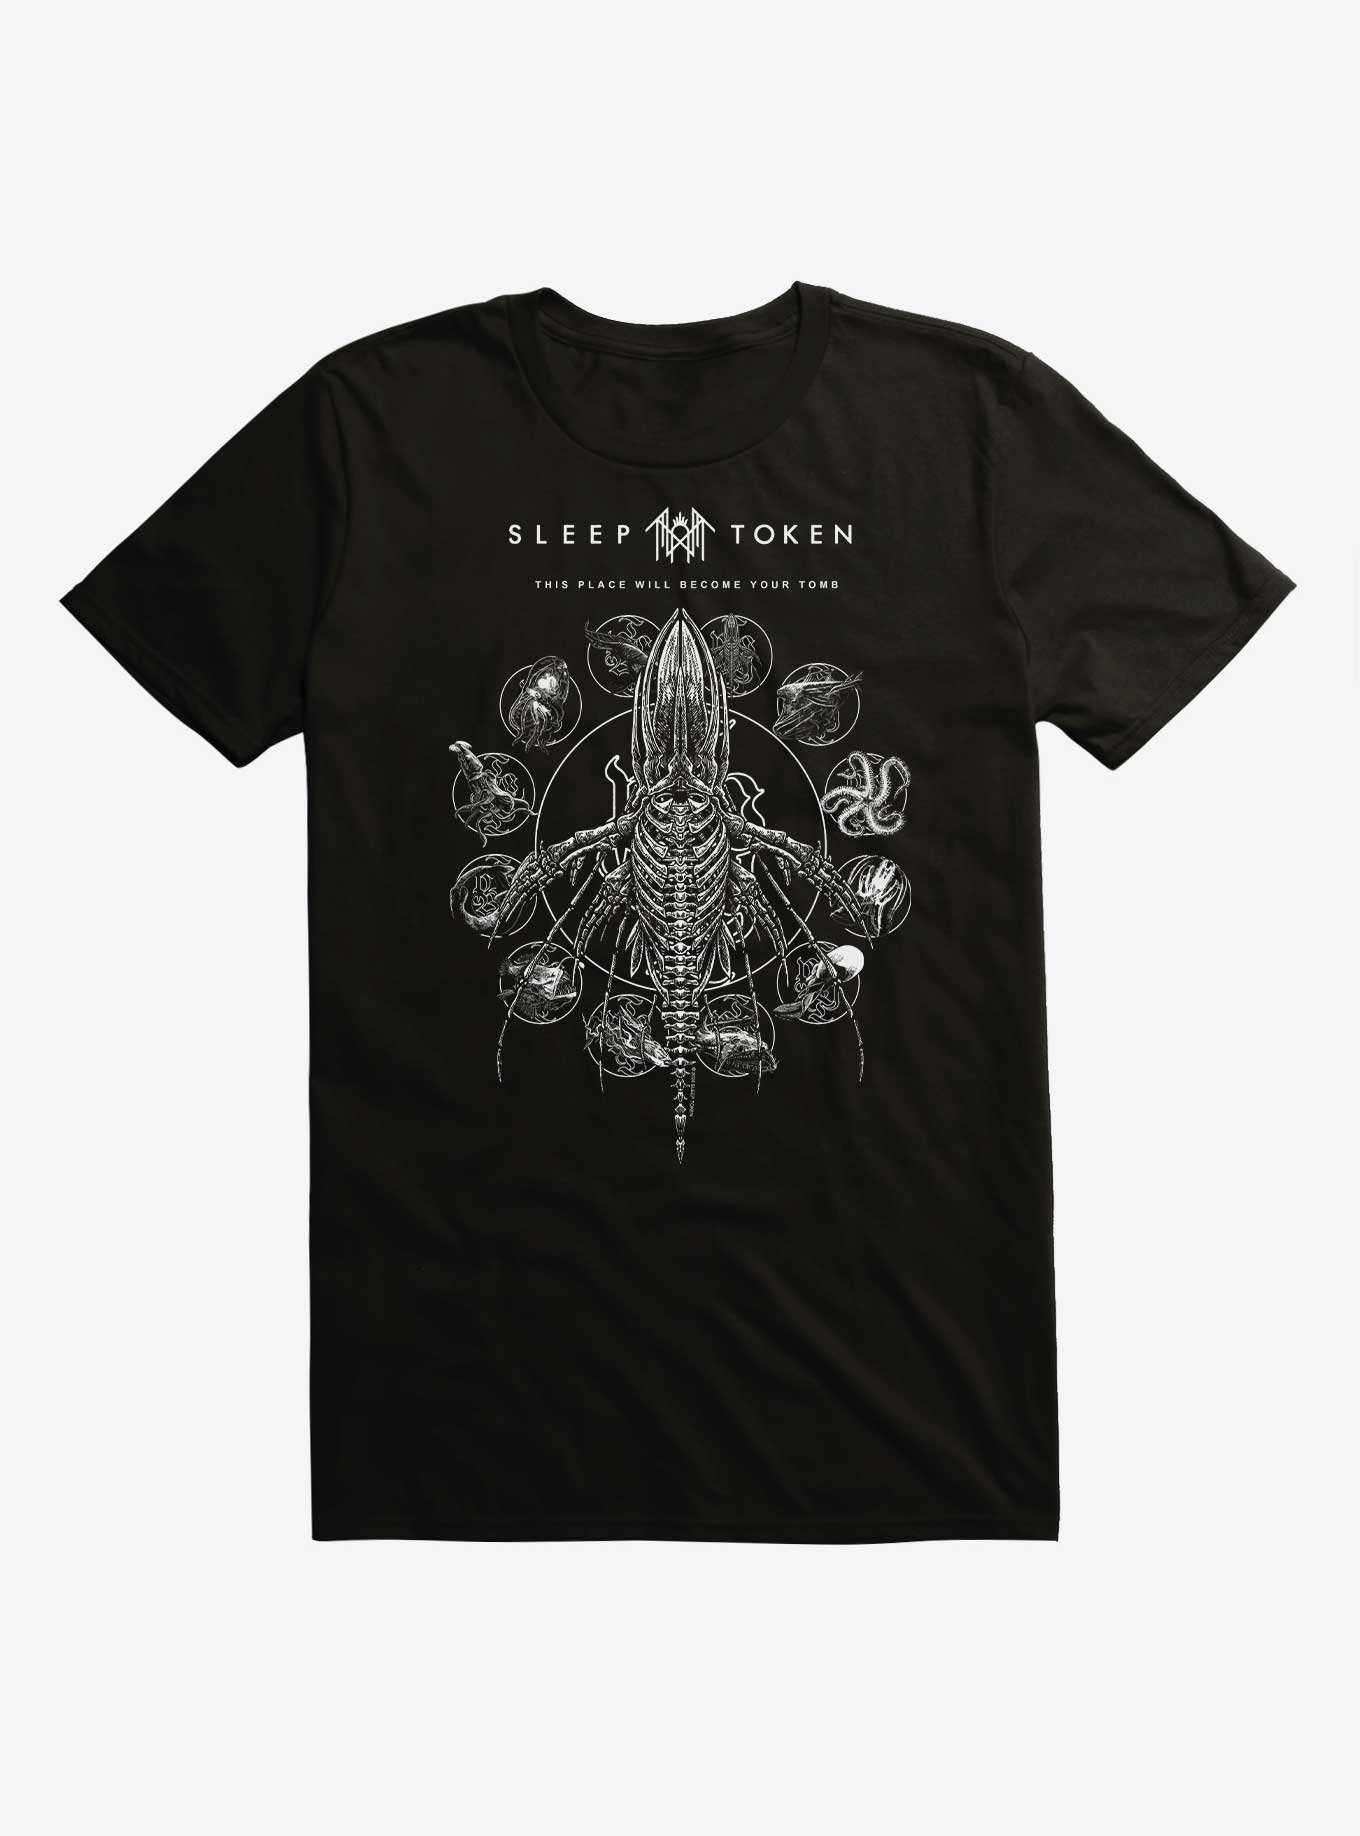 Best Band T-Shirts to Add to Your Collection: Save Up to 30% Off